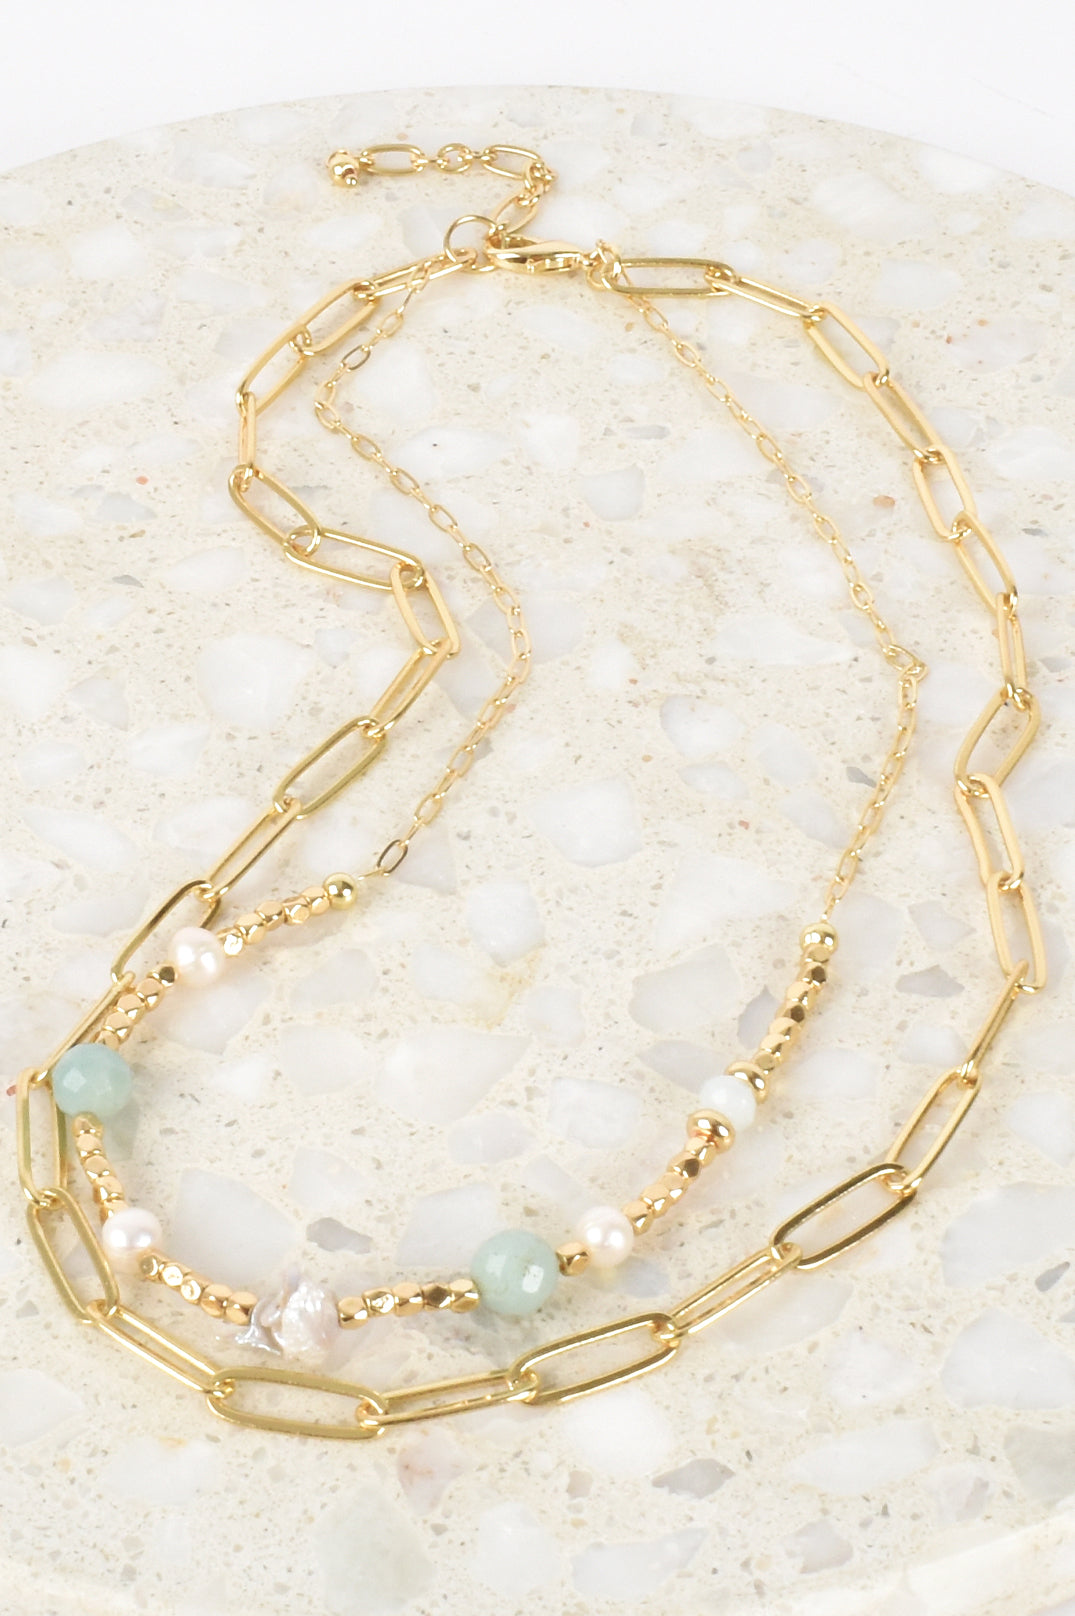 Adorne Bead Chain Duo Neclace  - Mint/Gold